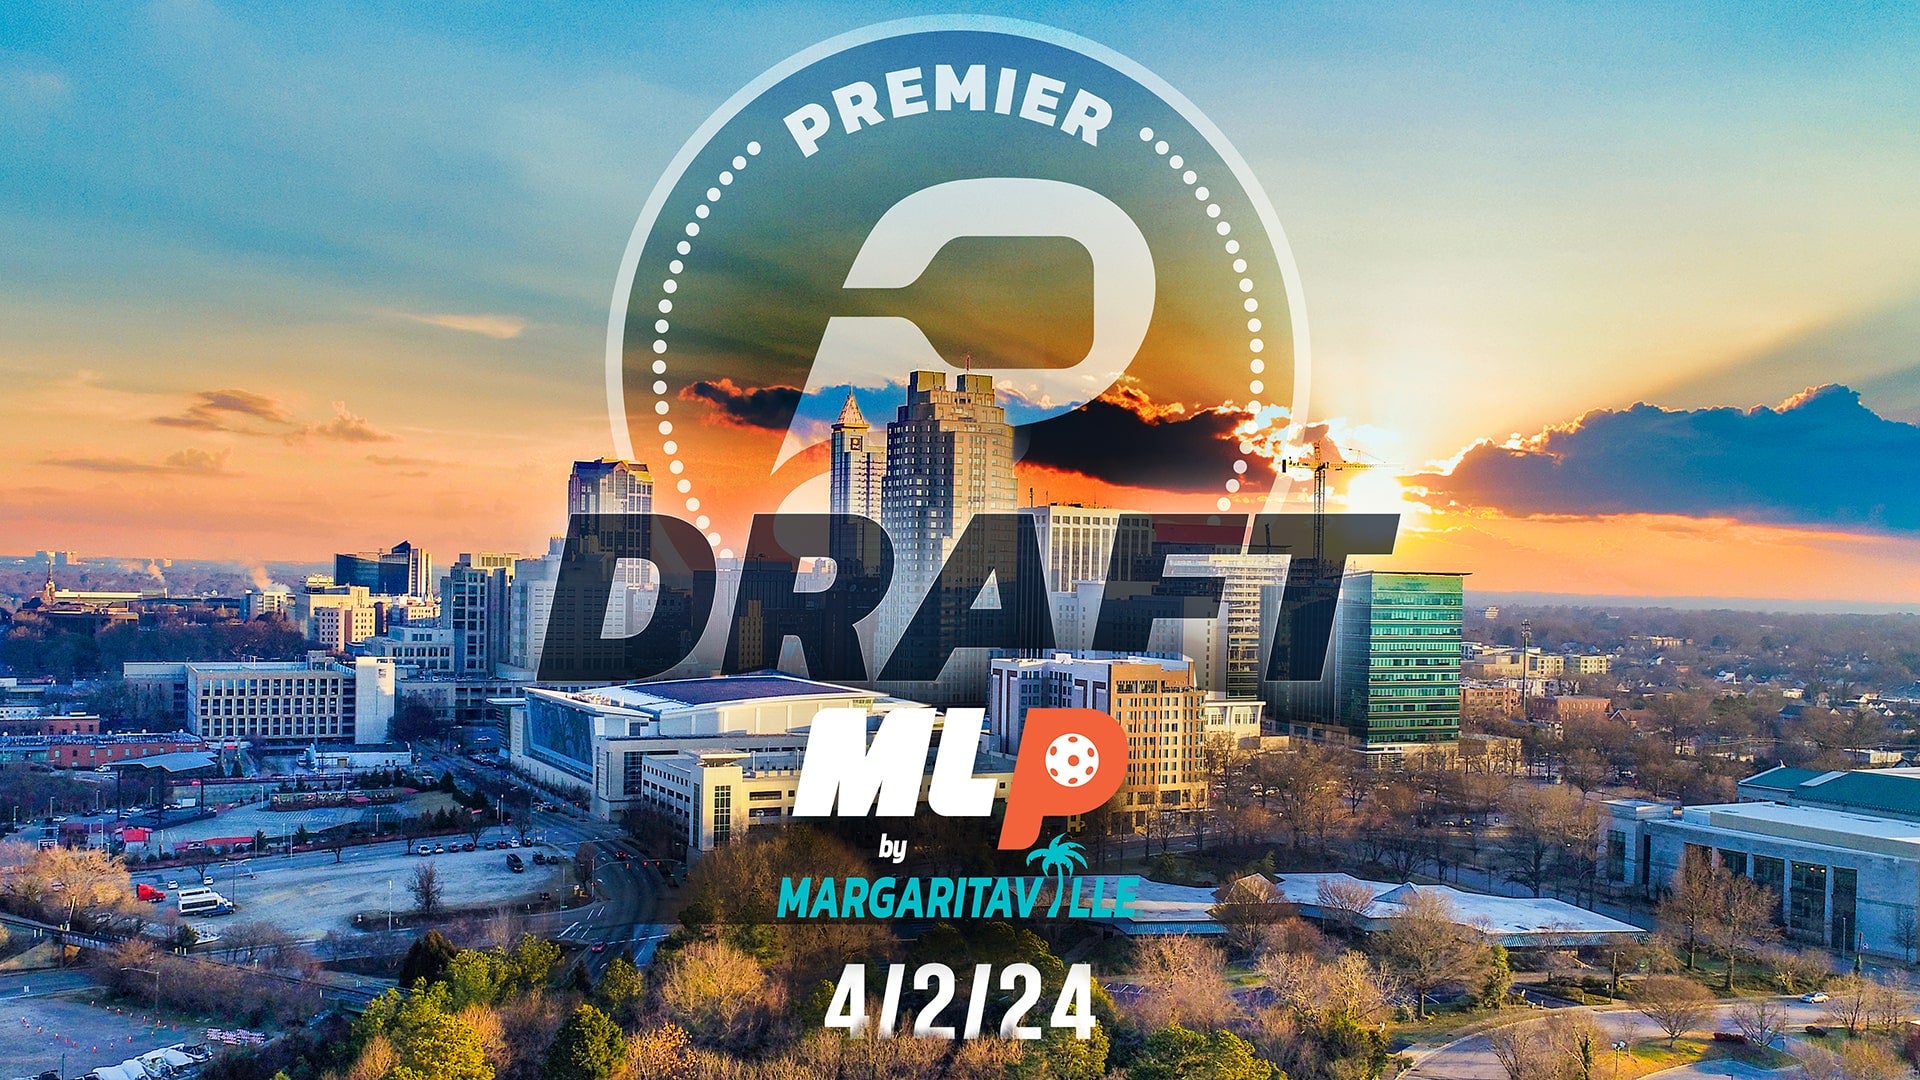 MLP by Margaritaville Announces Dates and Formats for 2024 Premier Level and Challenger Level Drafts